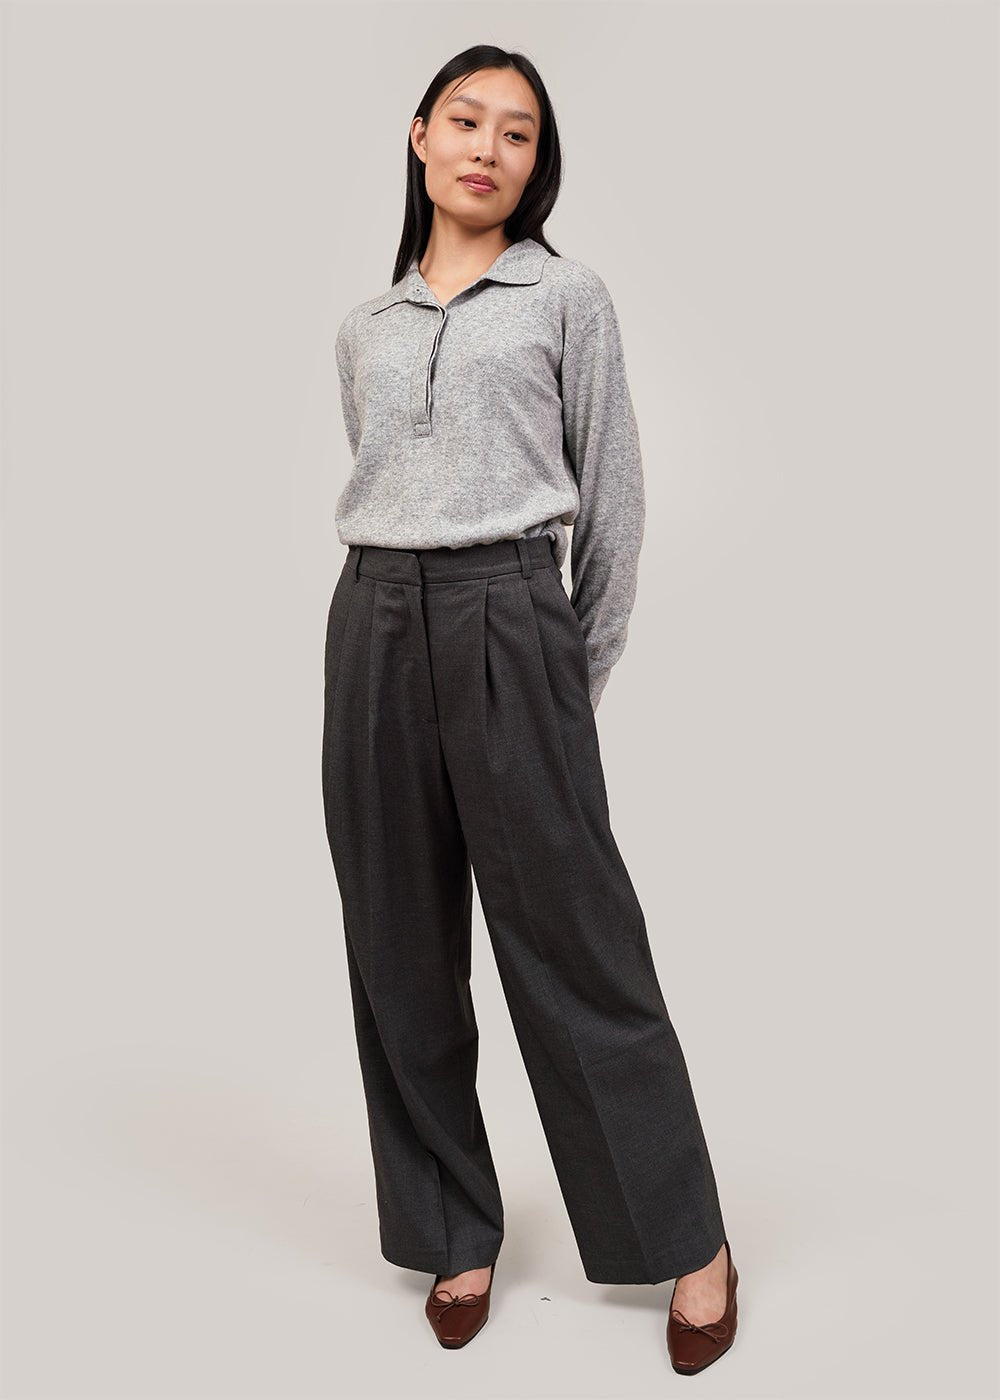 Mijeong Park Grey Cashmere Blend Polo Sweater - New Classics Studios Sustainable Ethical Fashion Canada